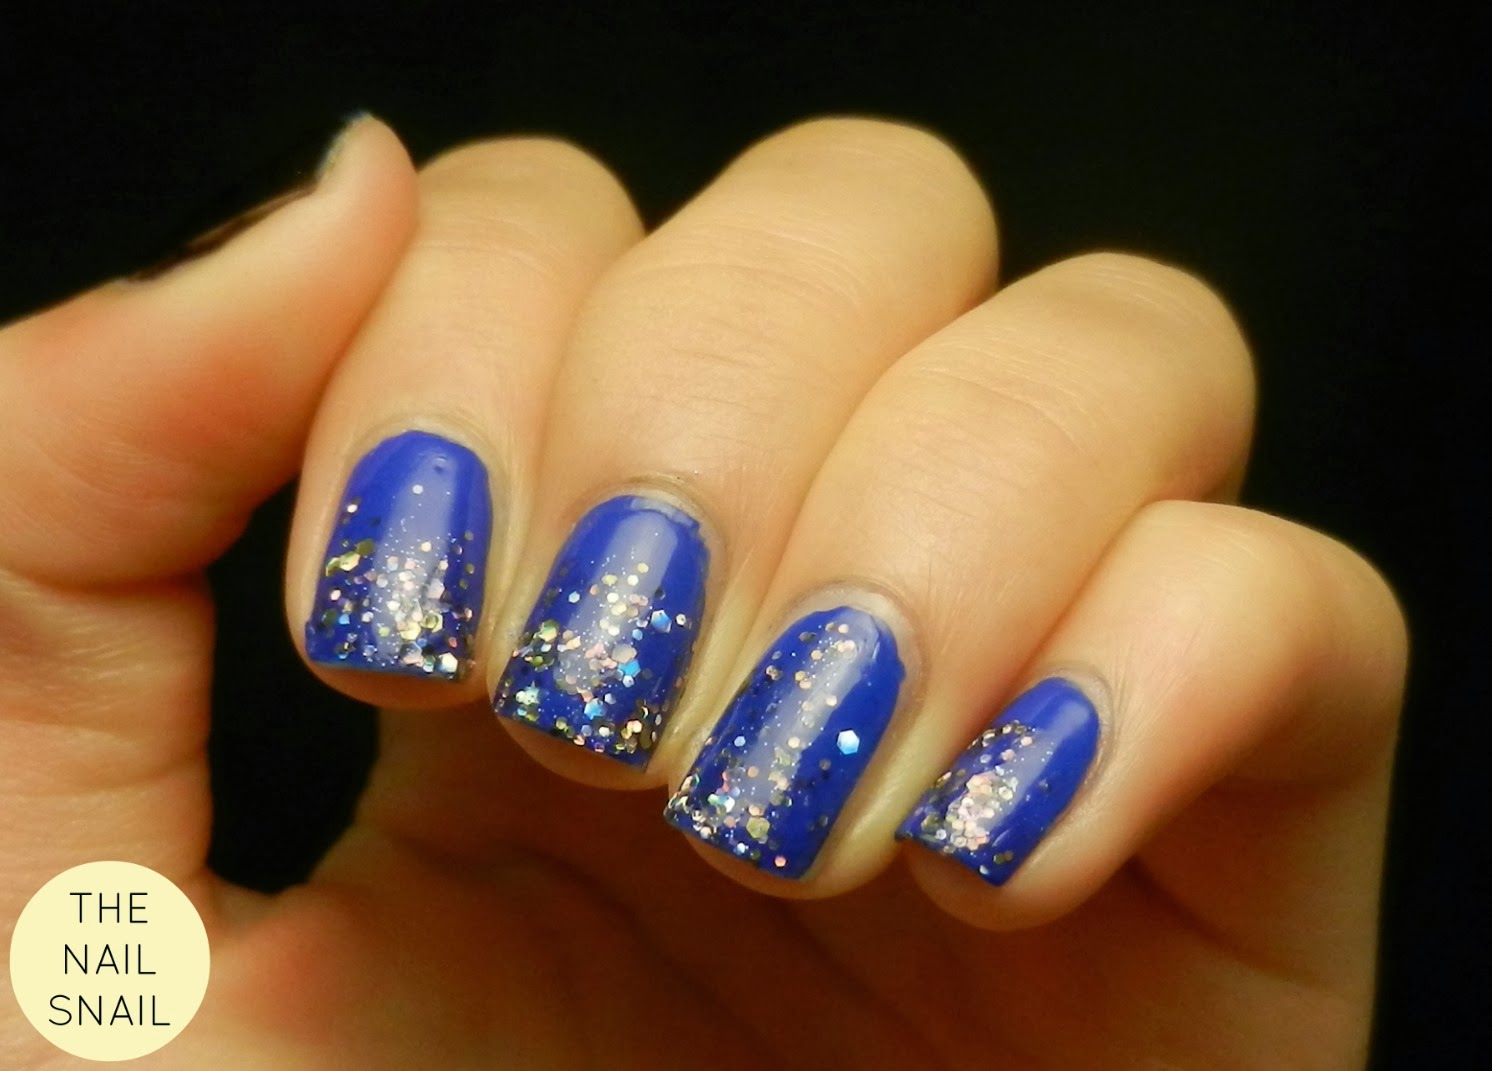 The Nail Snail: Belated New Year's Nails & 2013 Review